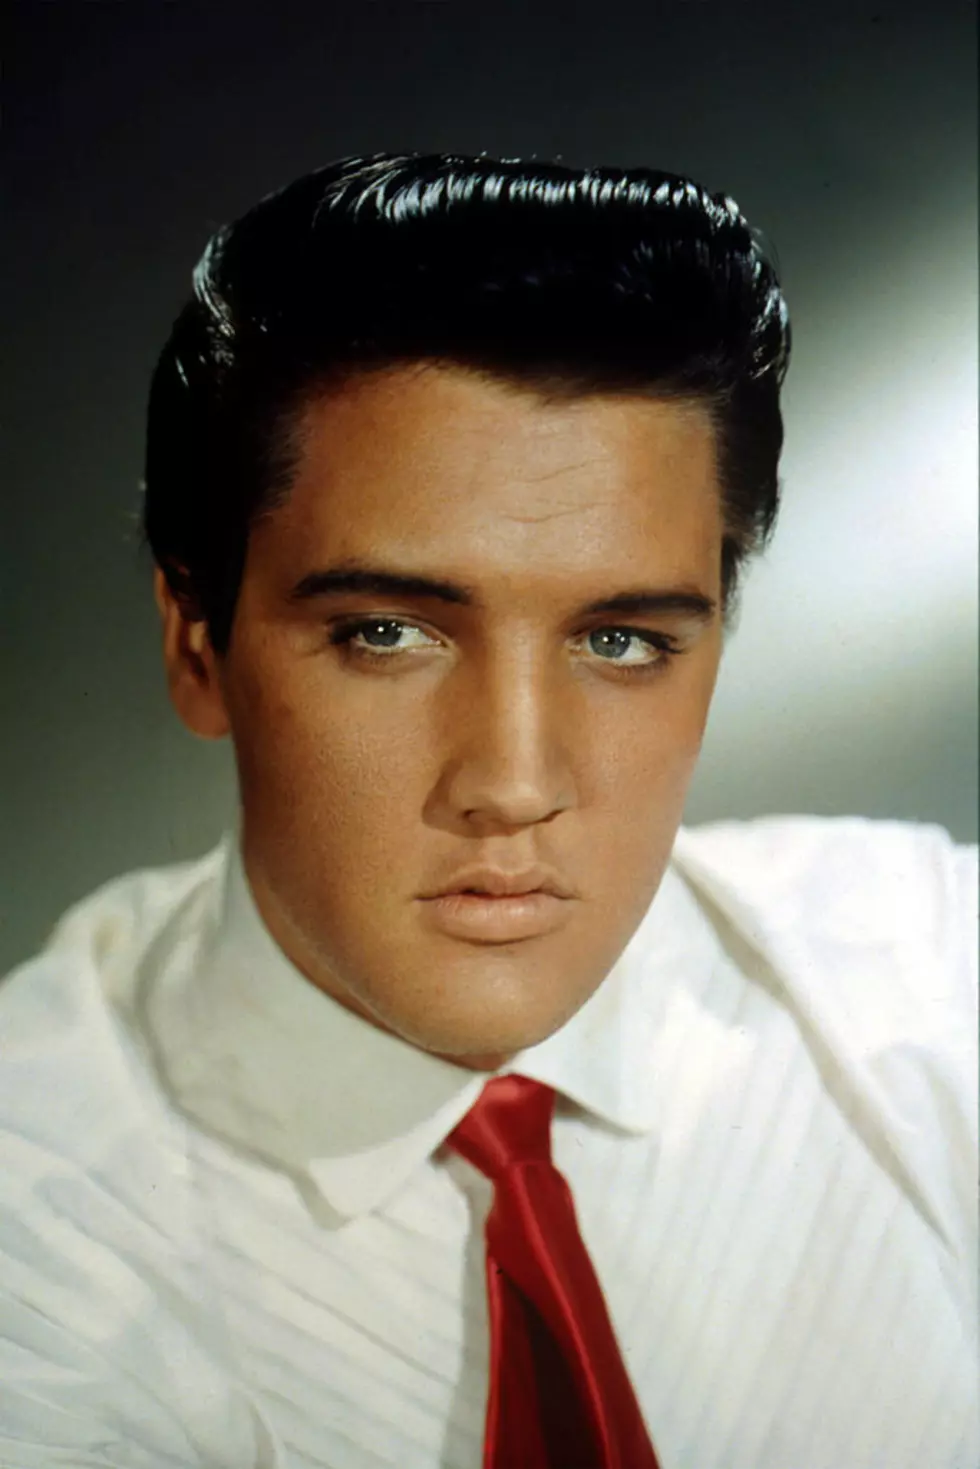 Wichita Falls is Home to the Largest Elvis Store in Texas